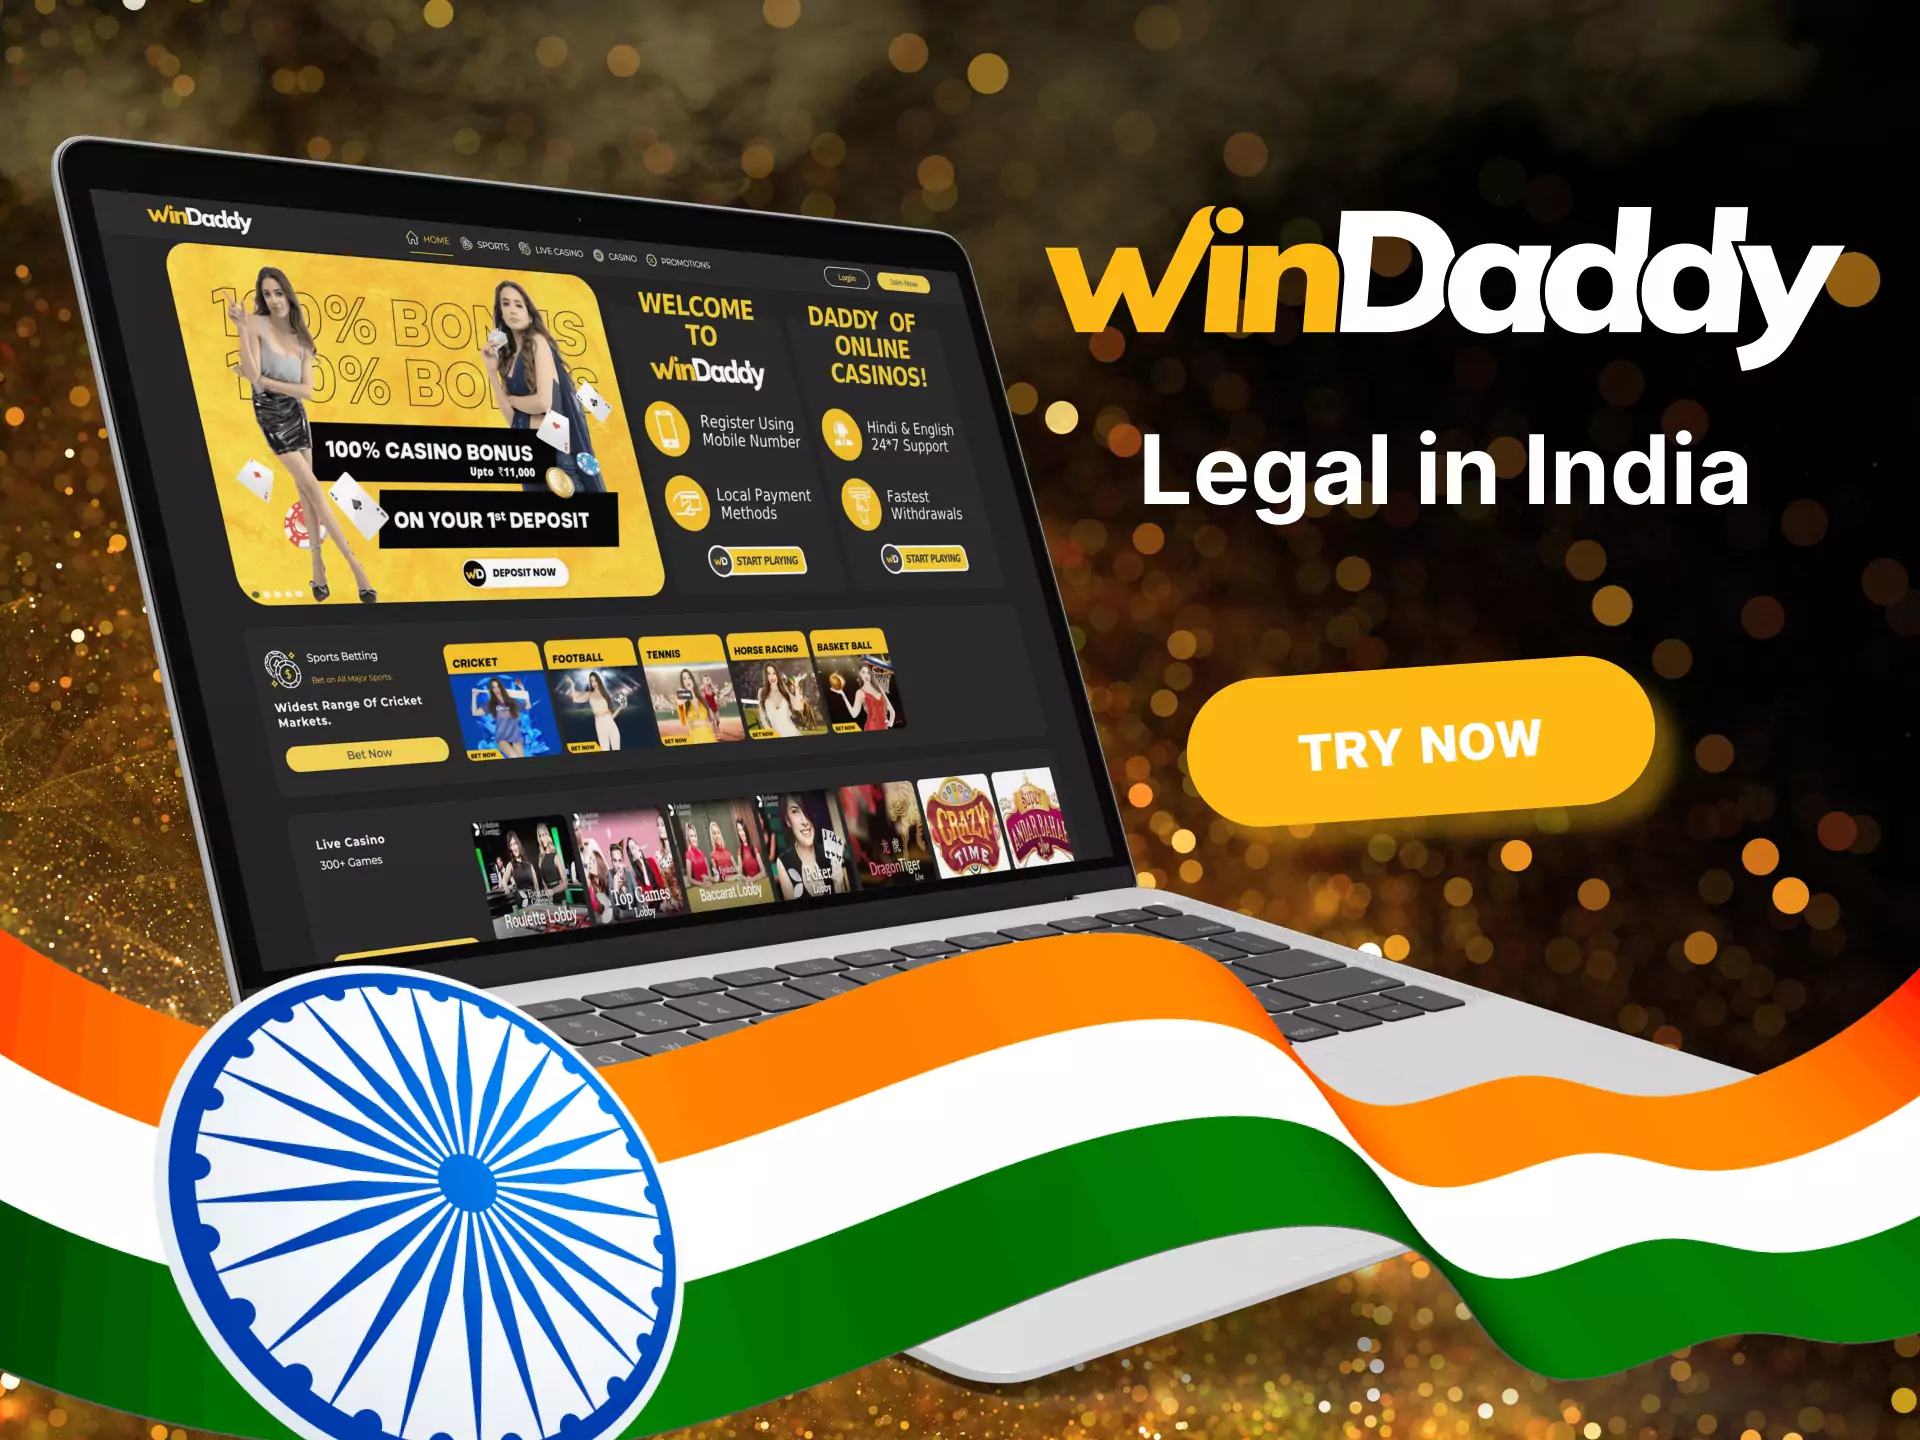 The Windaddy platform is absolutely legal in India.